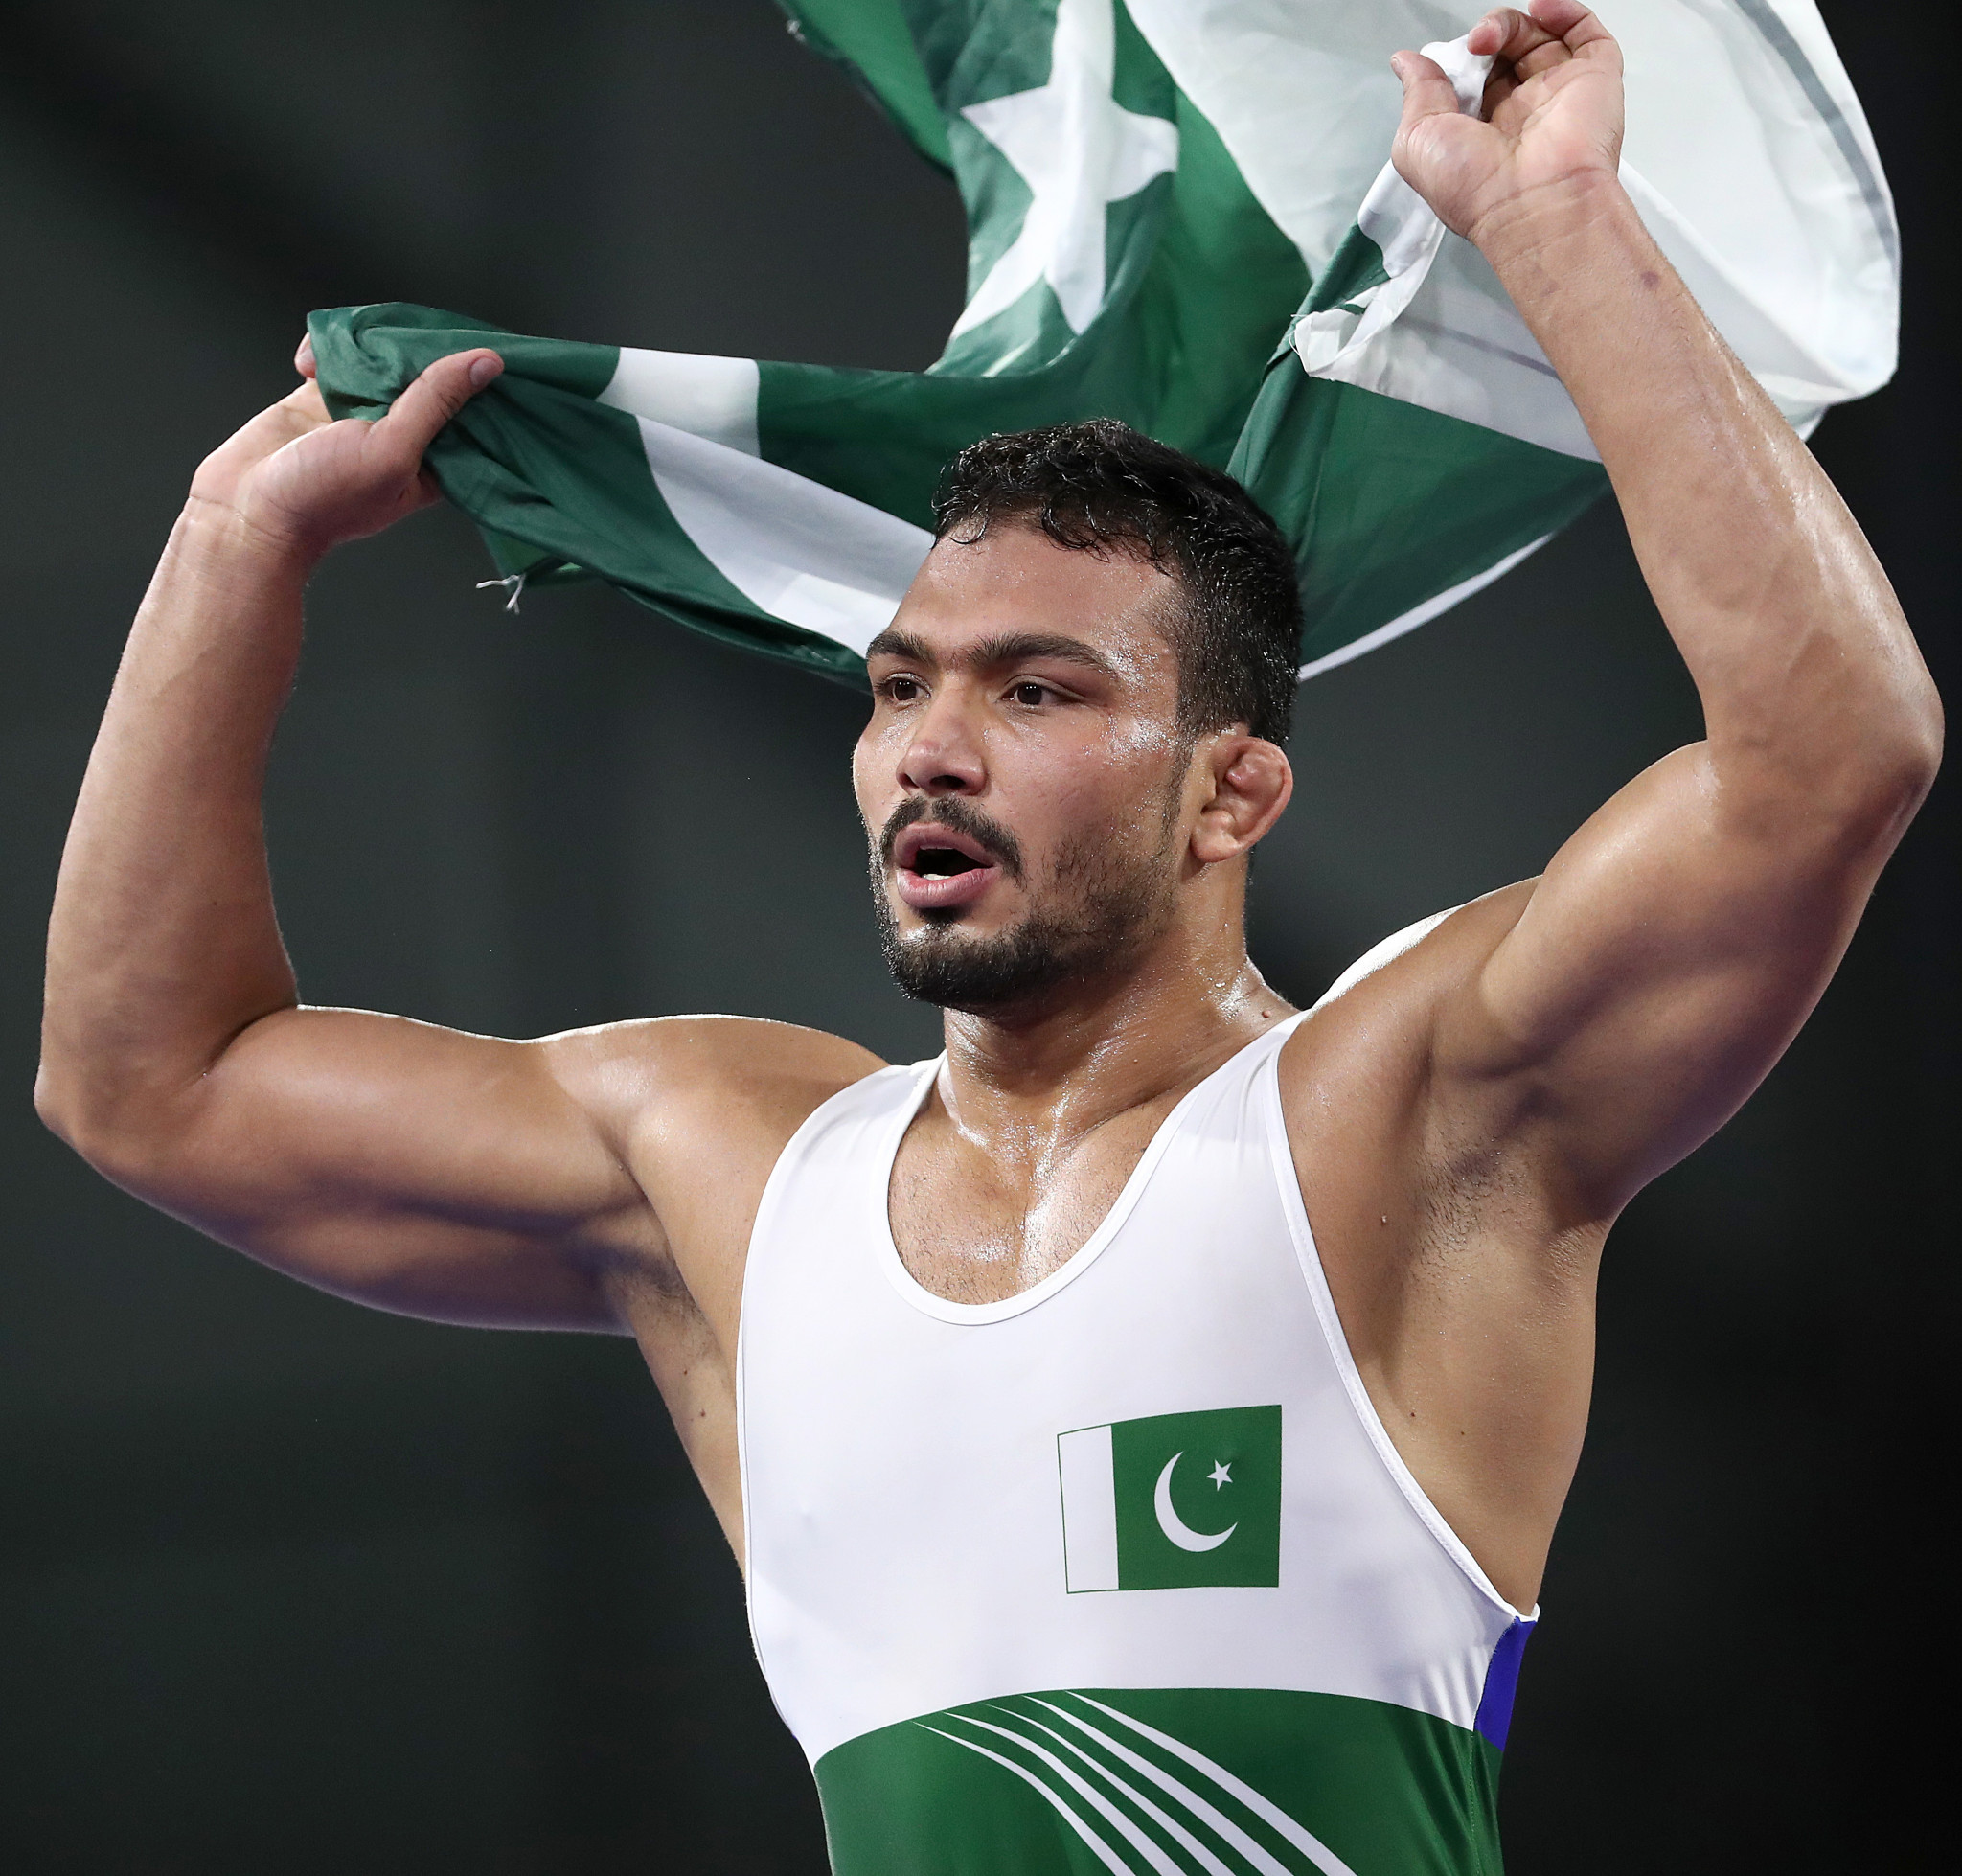 Pakistan's Muhammad Inam tasted victory in the men's 86kg freestyle event to secure his country's first gold medal of Gold Coast 2018 ©Getty Images